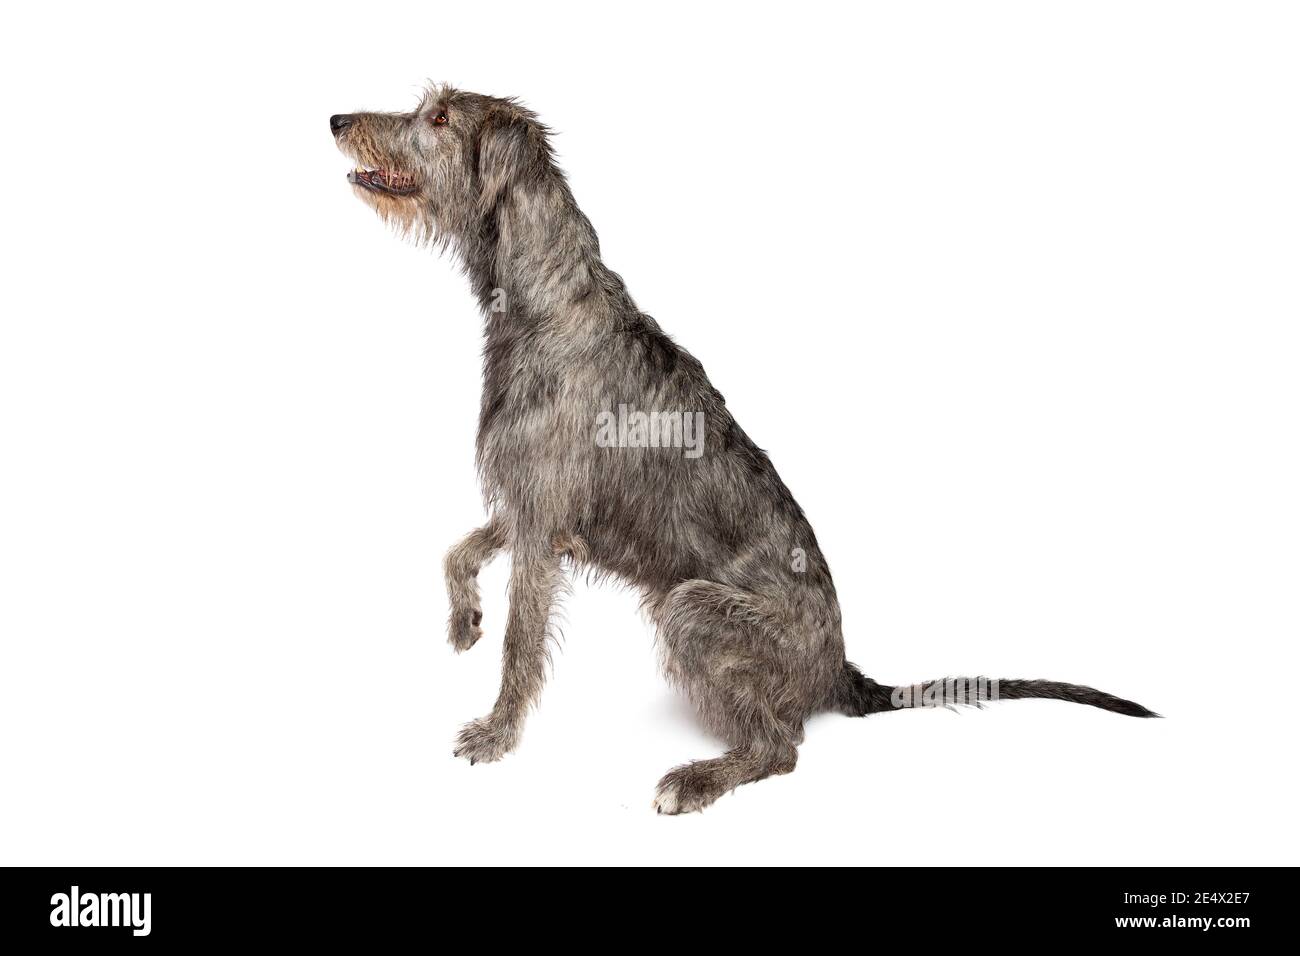 Irish wolfhound in front of a white background Stock Photo